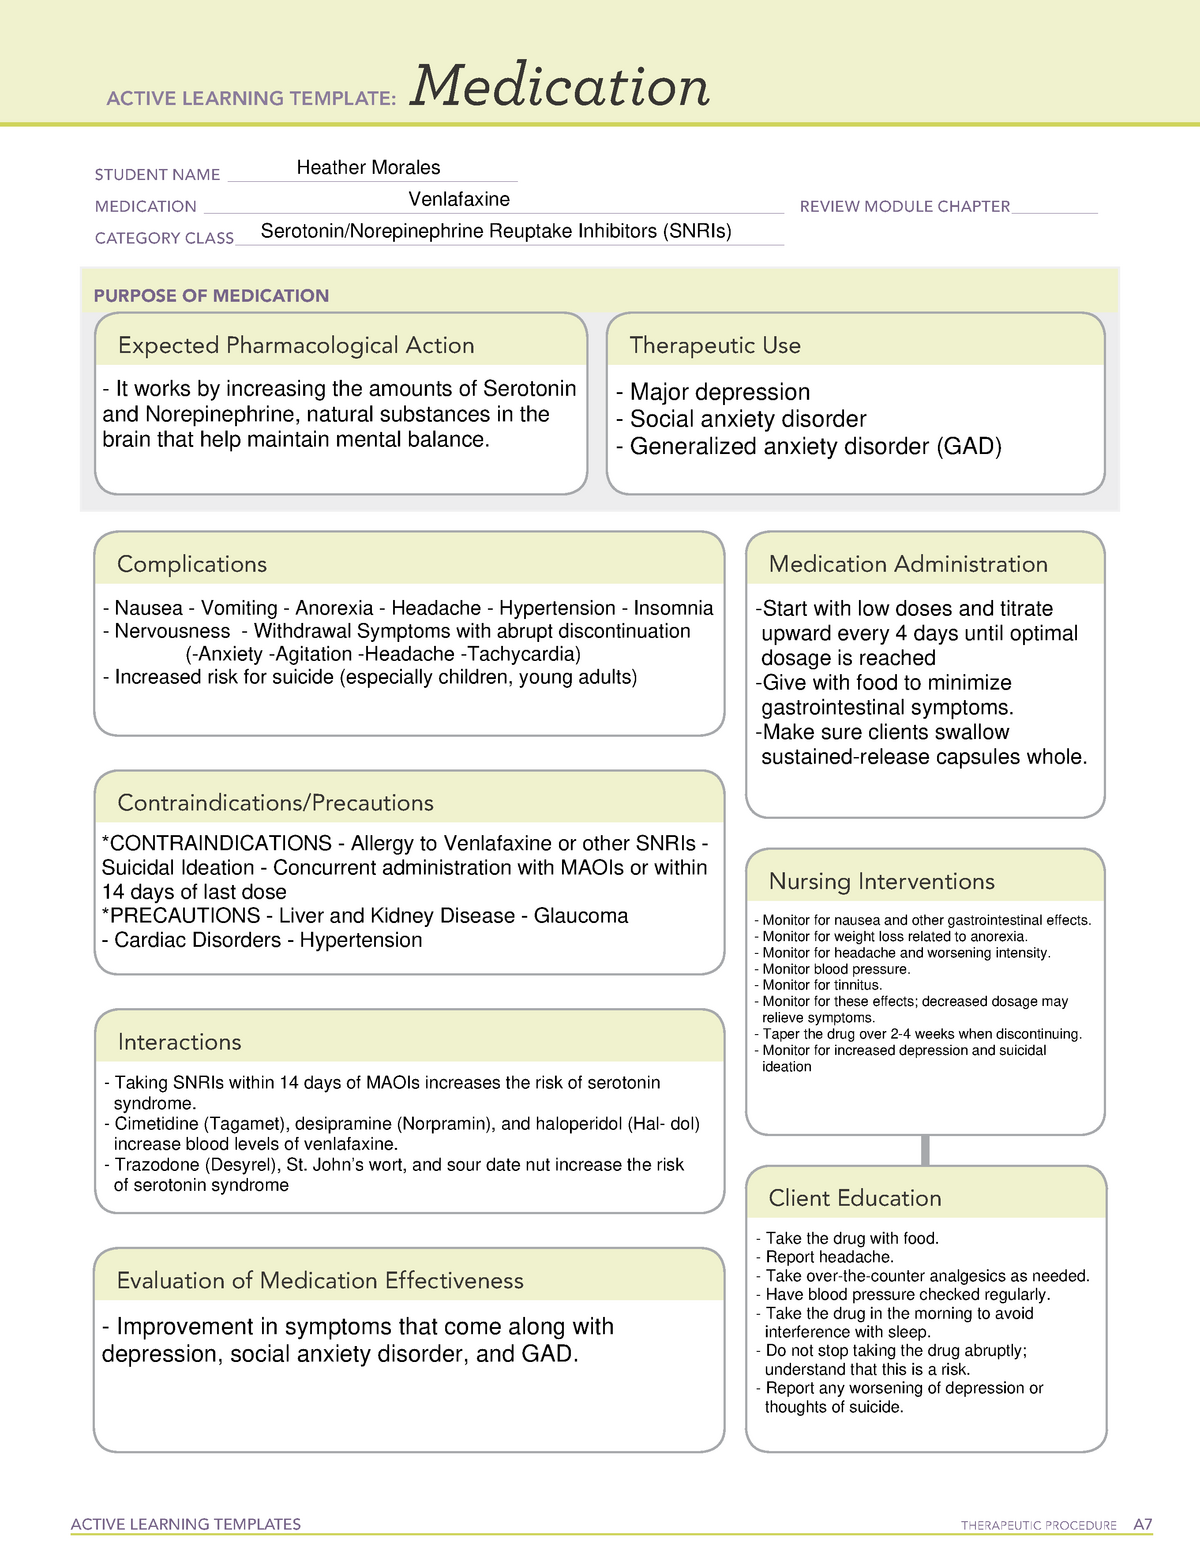 Med Templates Venlafaxine (SNRIs) ACTIVE LEARNING TEMPLATES